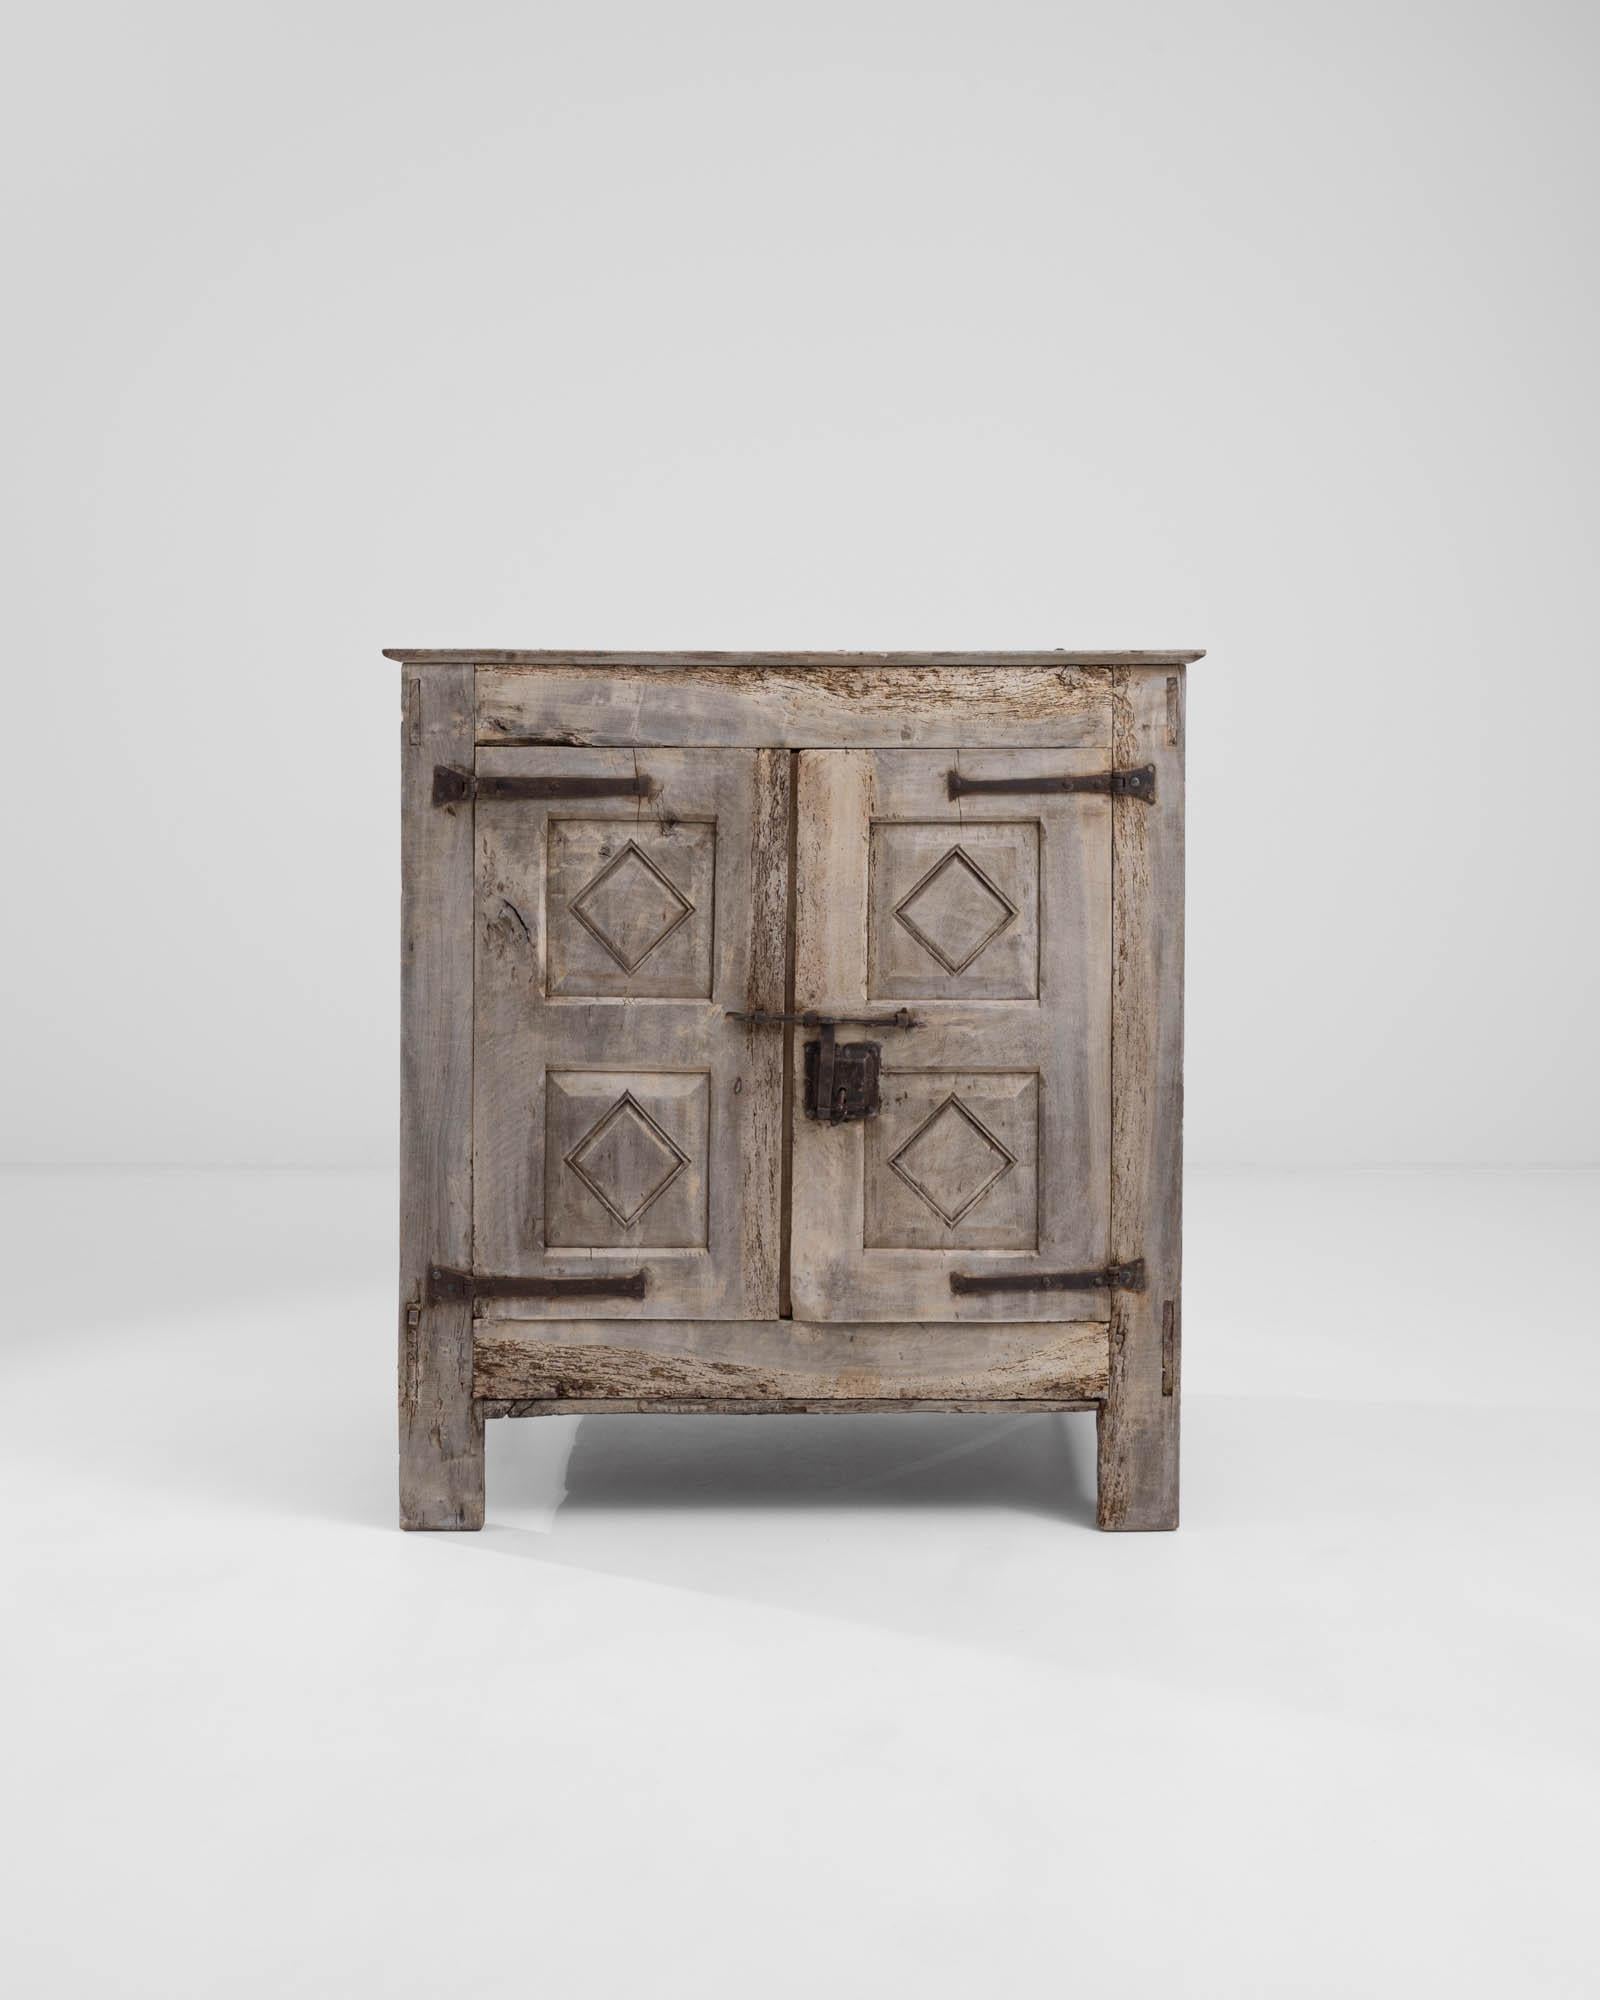 A rustic wooden cabinet from 18th century France. The elaborate metal keyhole and wrought iron hinges, speckled with a mesmerizing patina convey a deep sense of history and the trappings of this drawer’s experience. With a countervailing effect, the